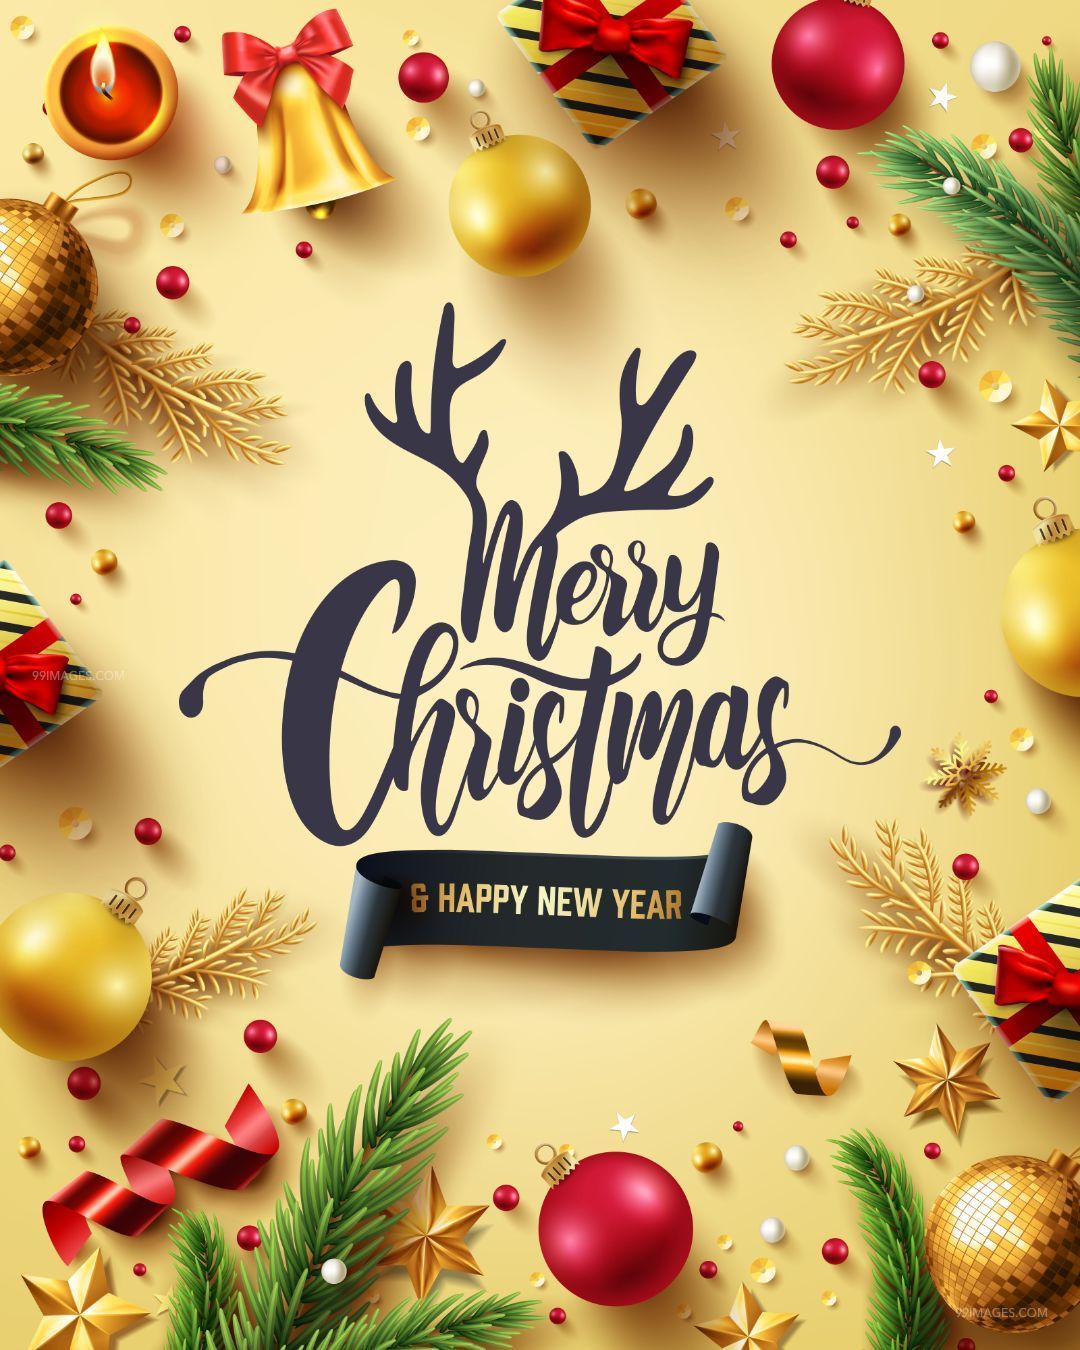 Free download [60] Merry Christmas [25 December 2019] Images ...